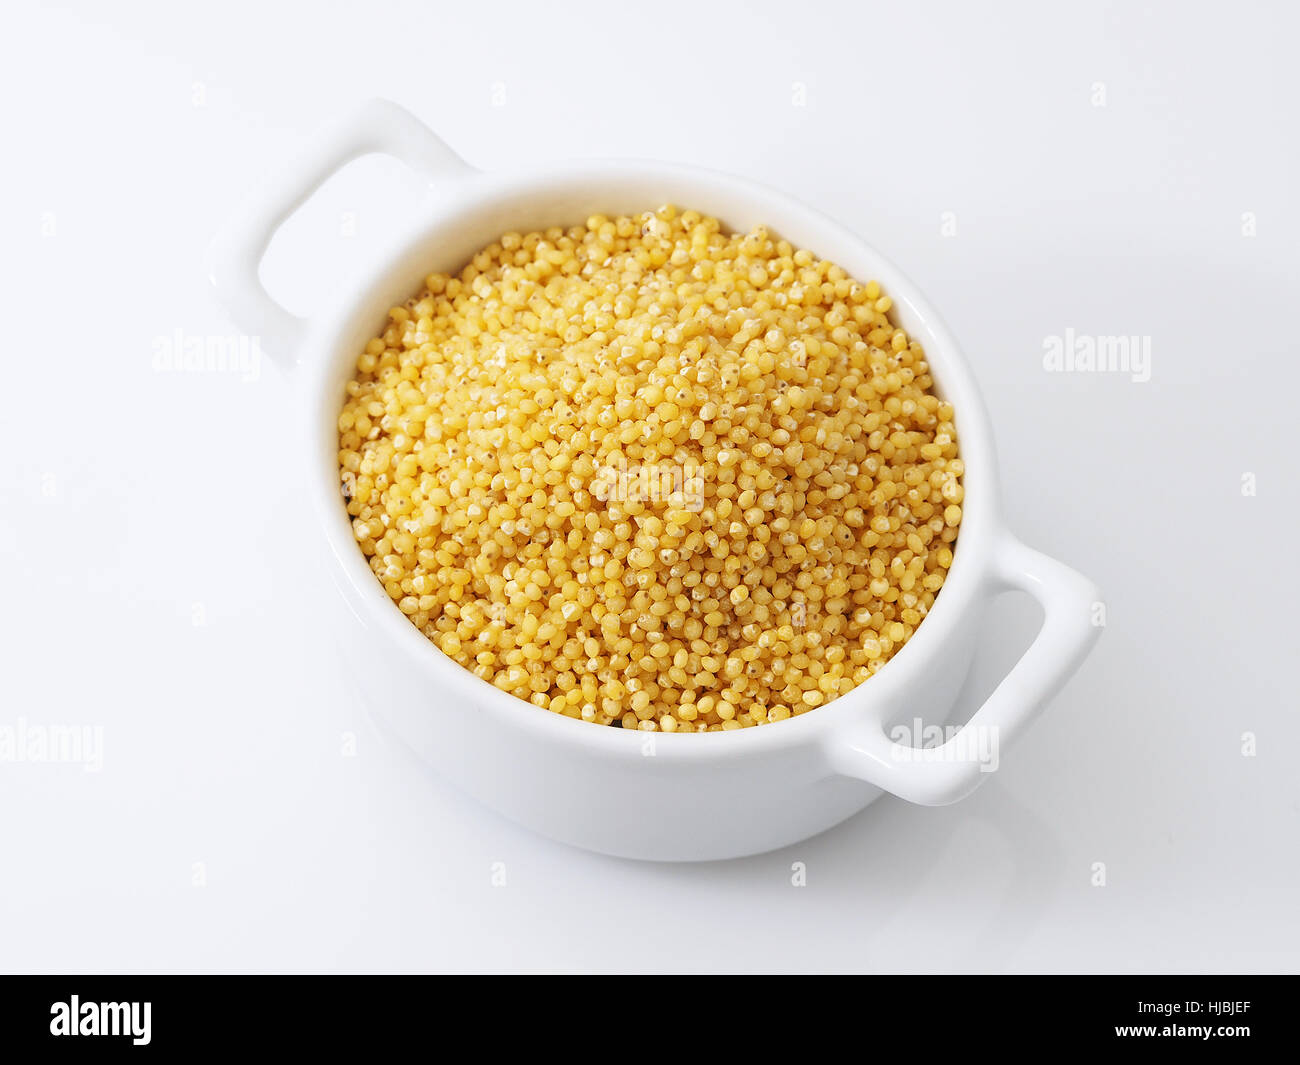 Save Download Preview Millet  with scoop isolated on white background Stock Photo